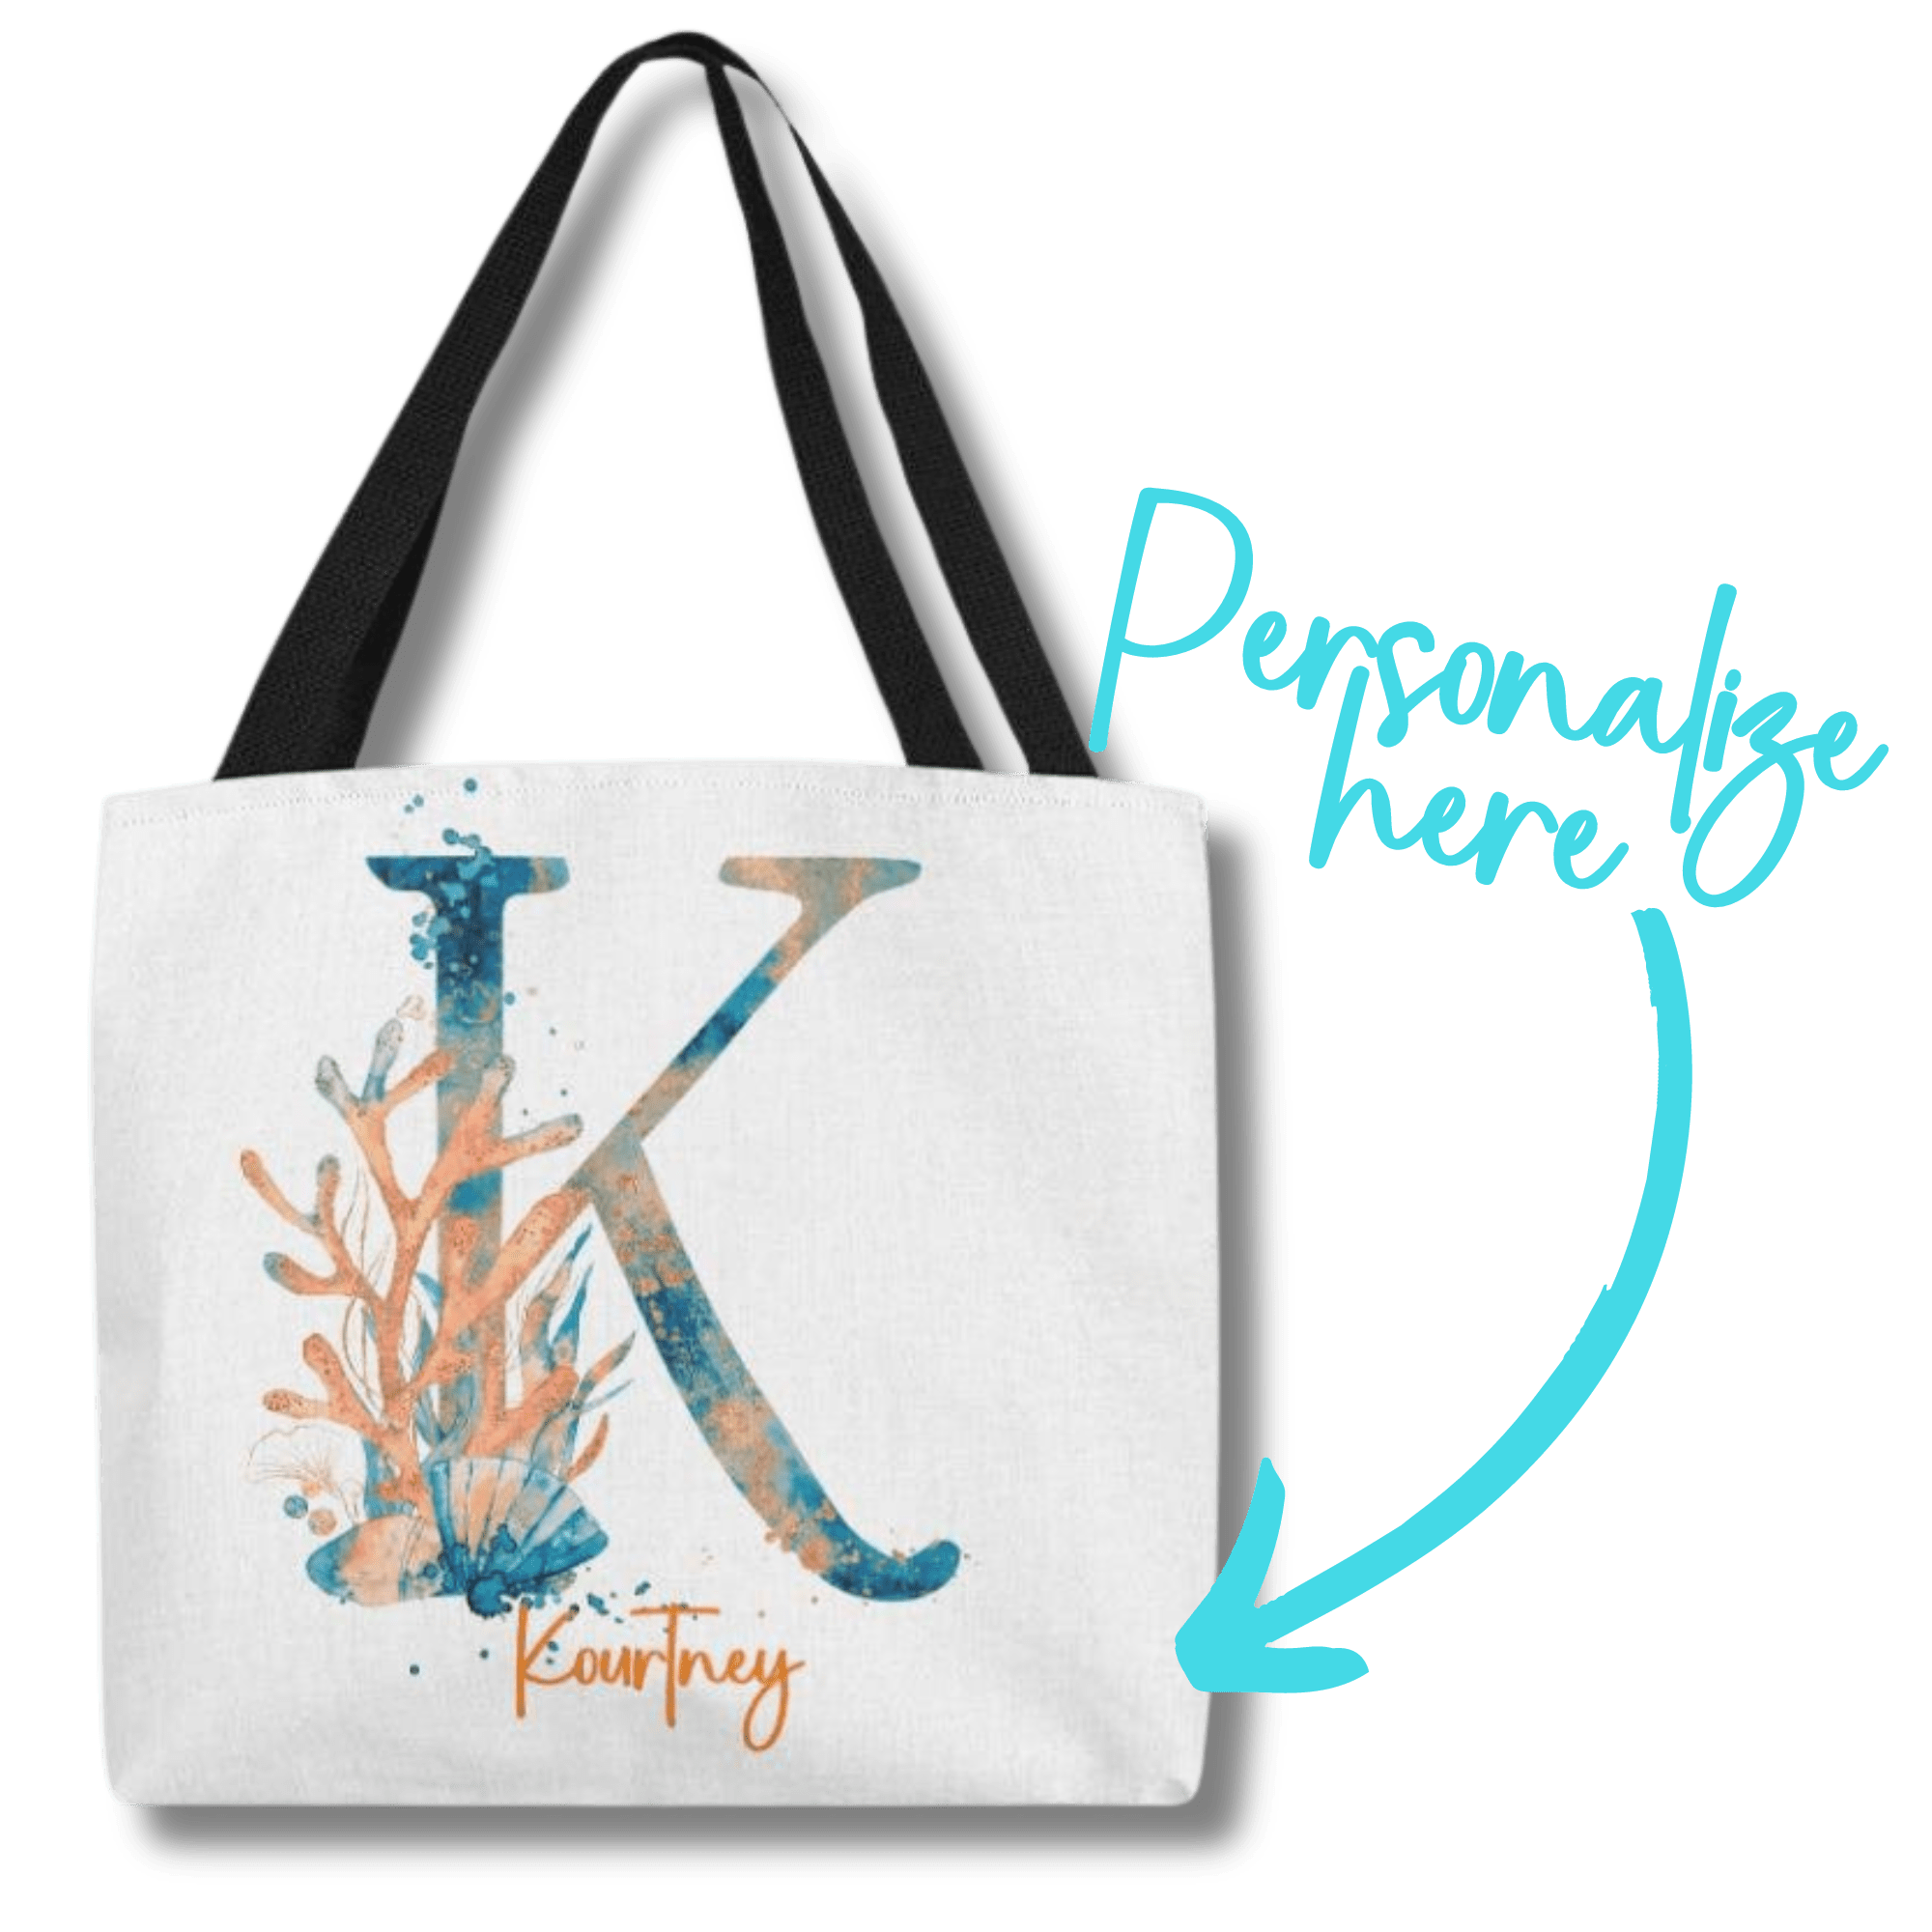 PERSONALIZABLE TOTE BAG | MONOGRAM - K | PERFECT GIFT FOR WIFE, SISTER, CO-WORKER